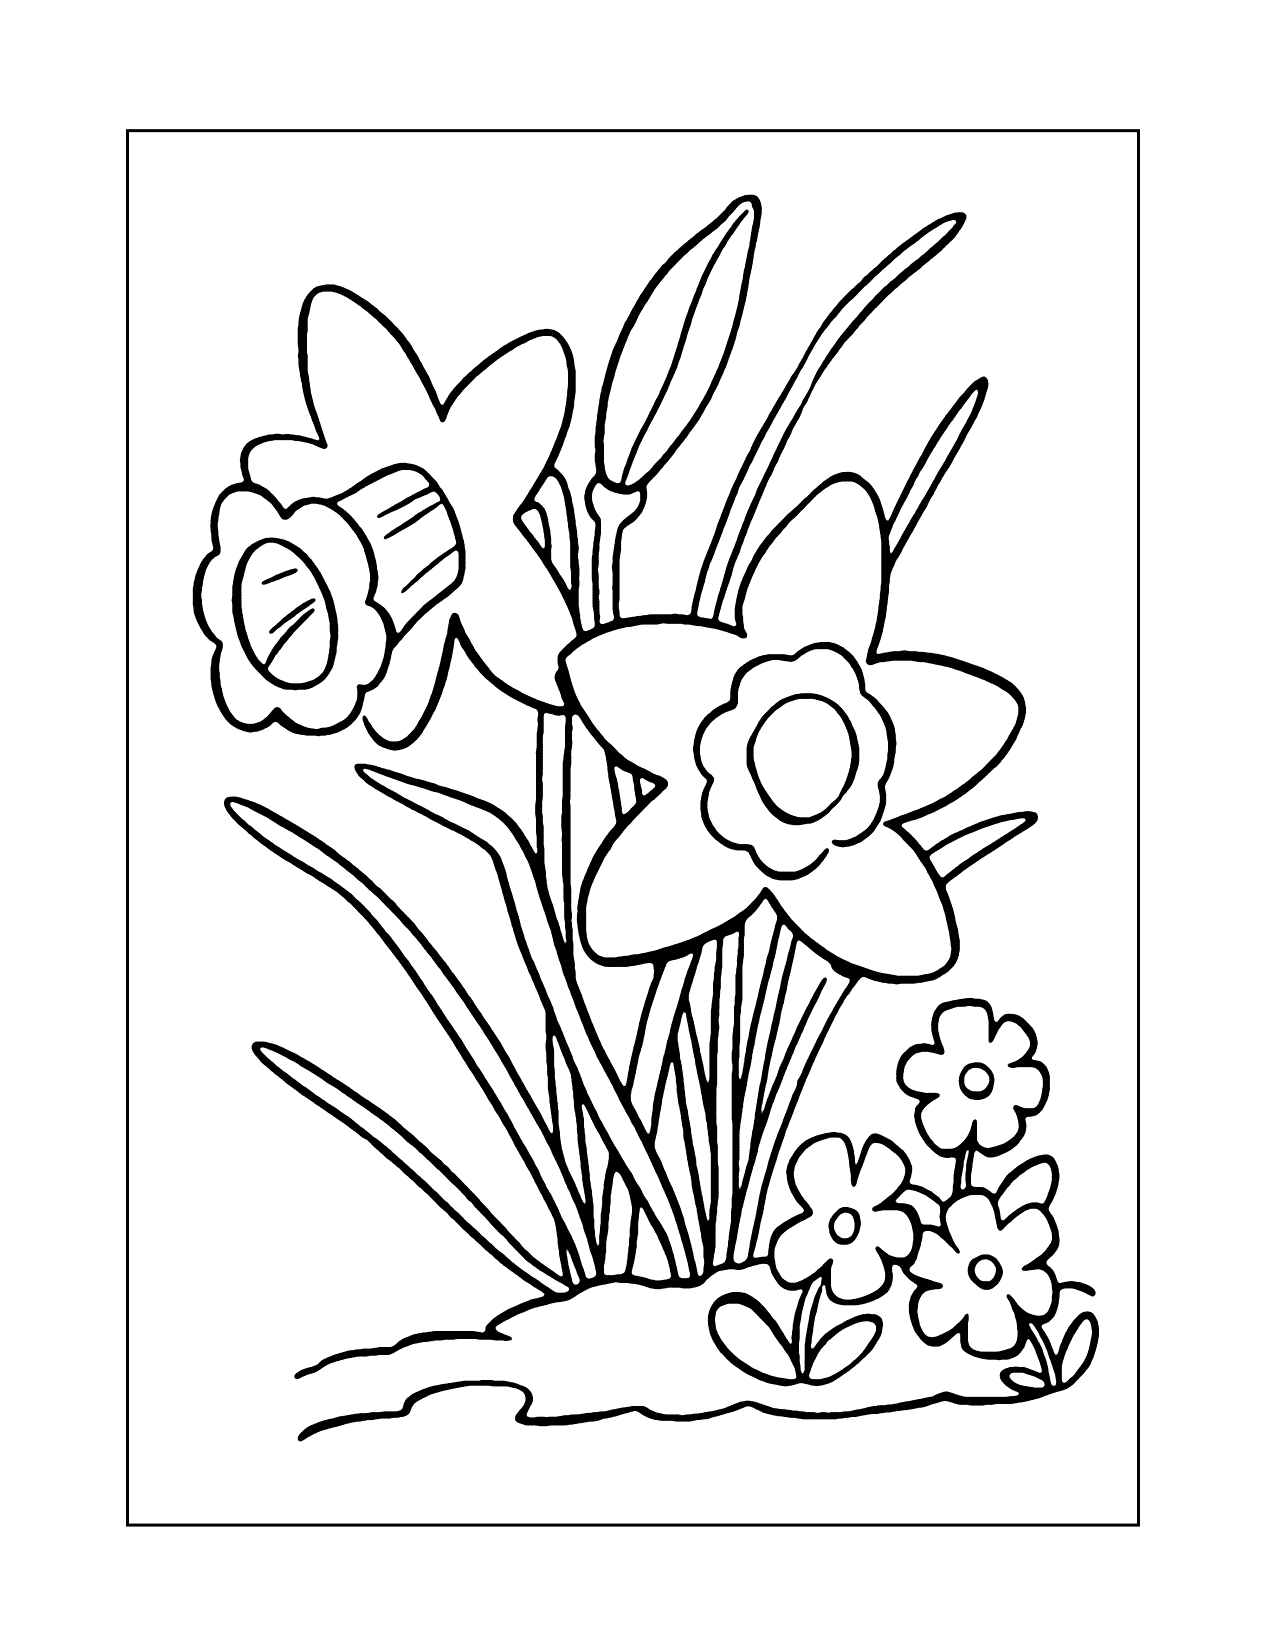 Cute Daffodil Flowers Coloring Page